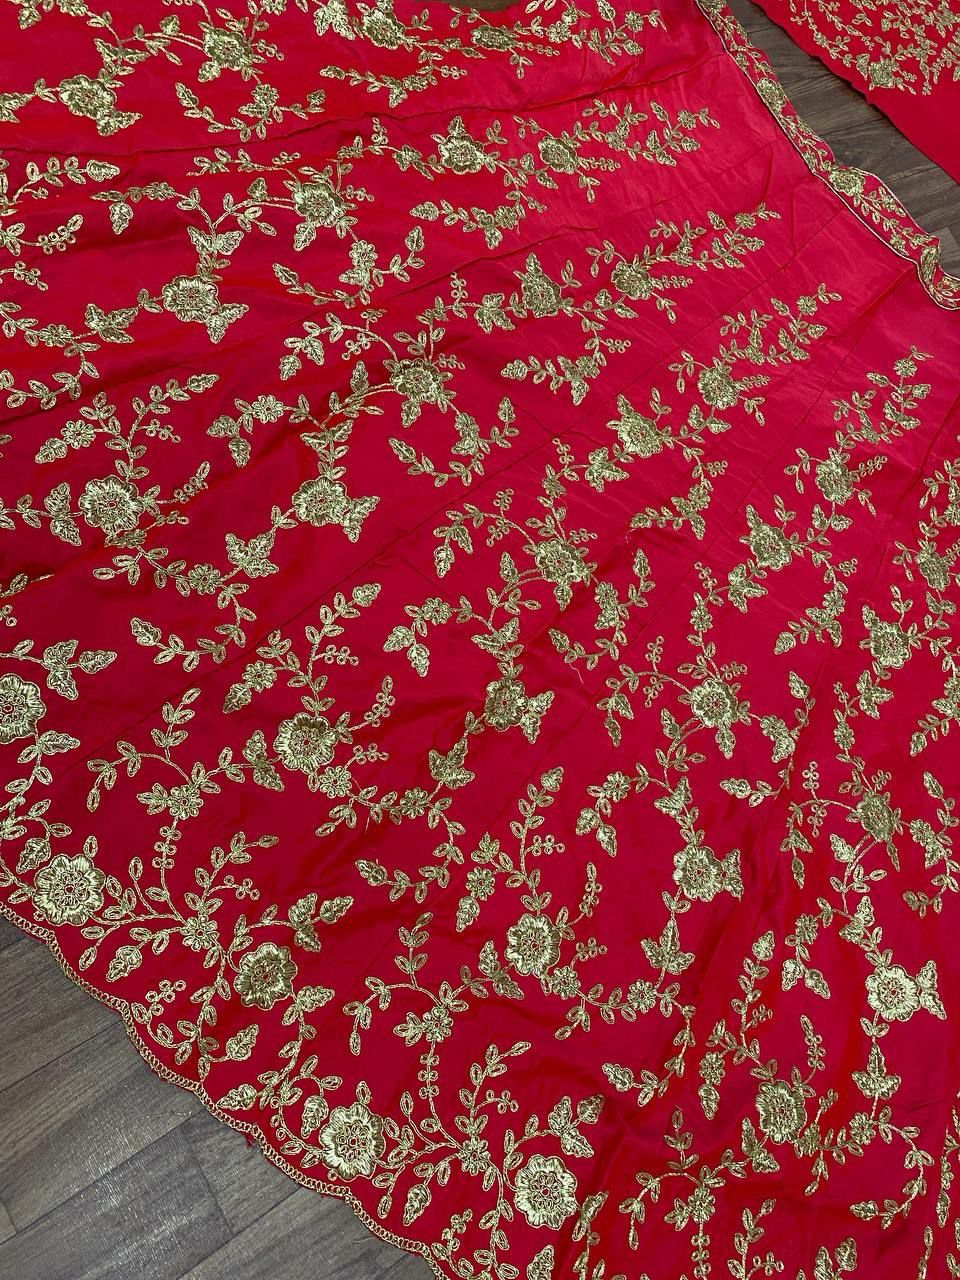 Attractive Red Color Designer Embroidered Satin Silk Lehenga Choli For Women In USA